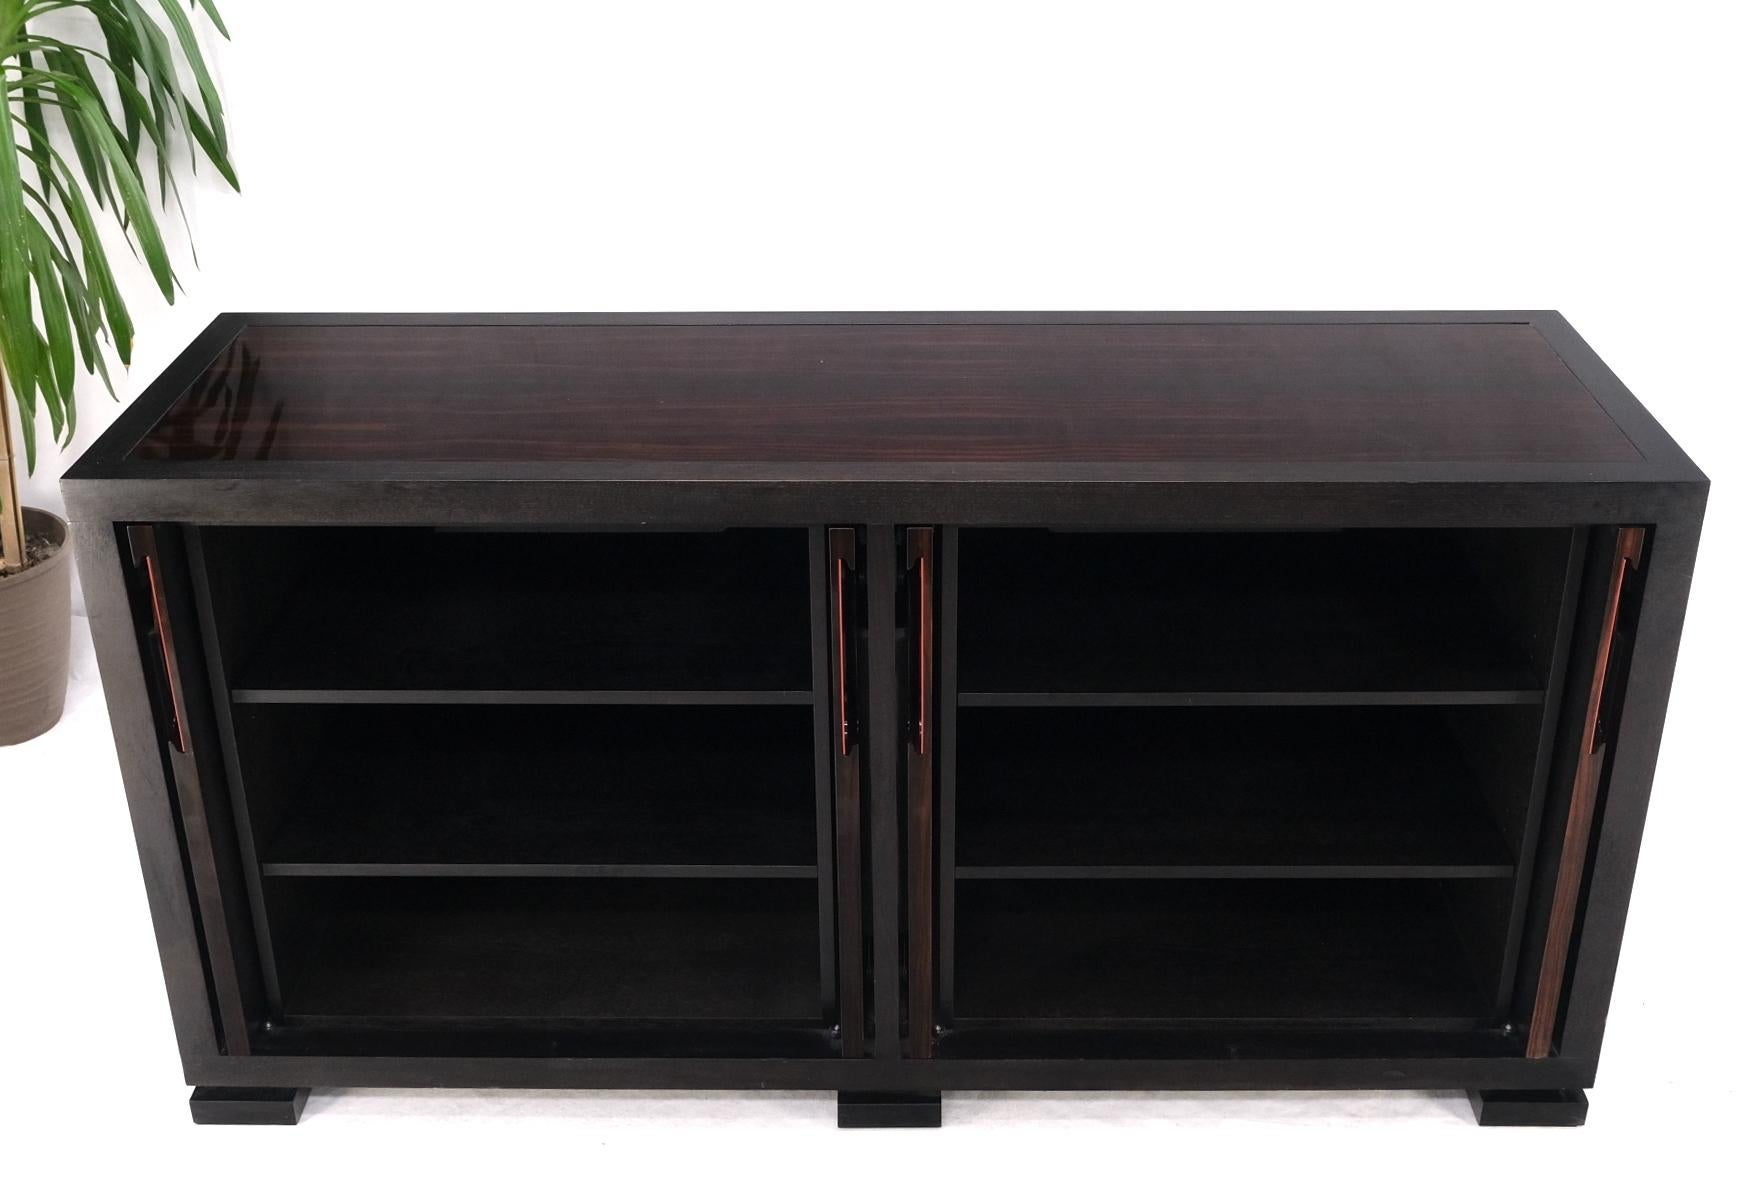 Acrylic Christian Liaigre Holly Hunt Rosewood Ebonized Trim 4 Door Compartment Credenza For Sale